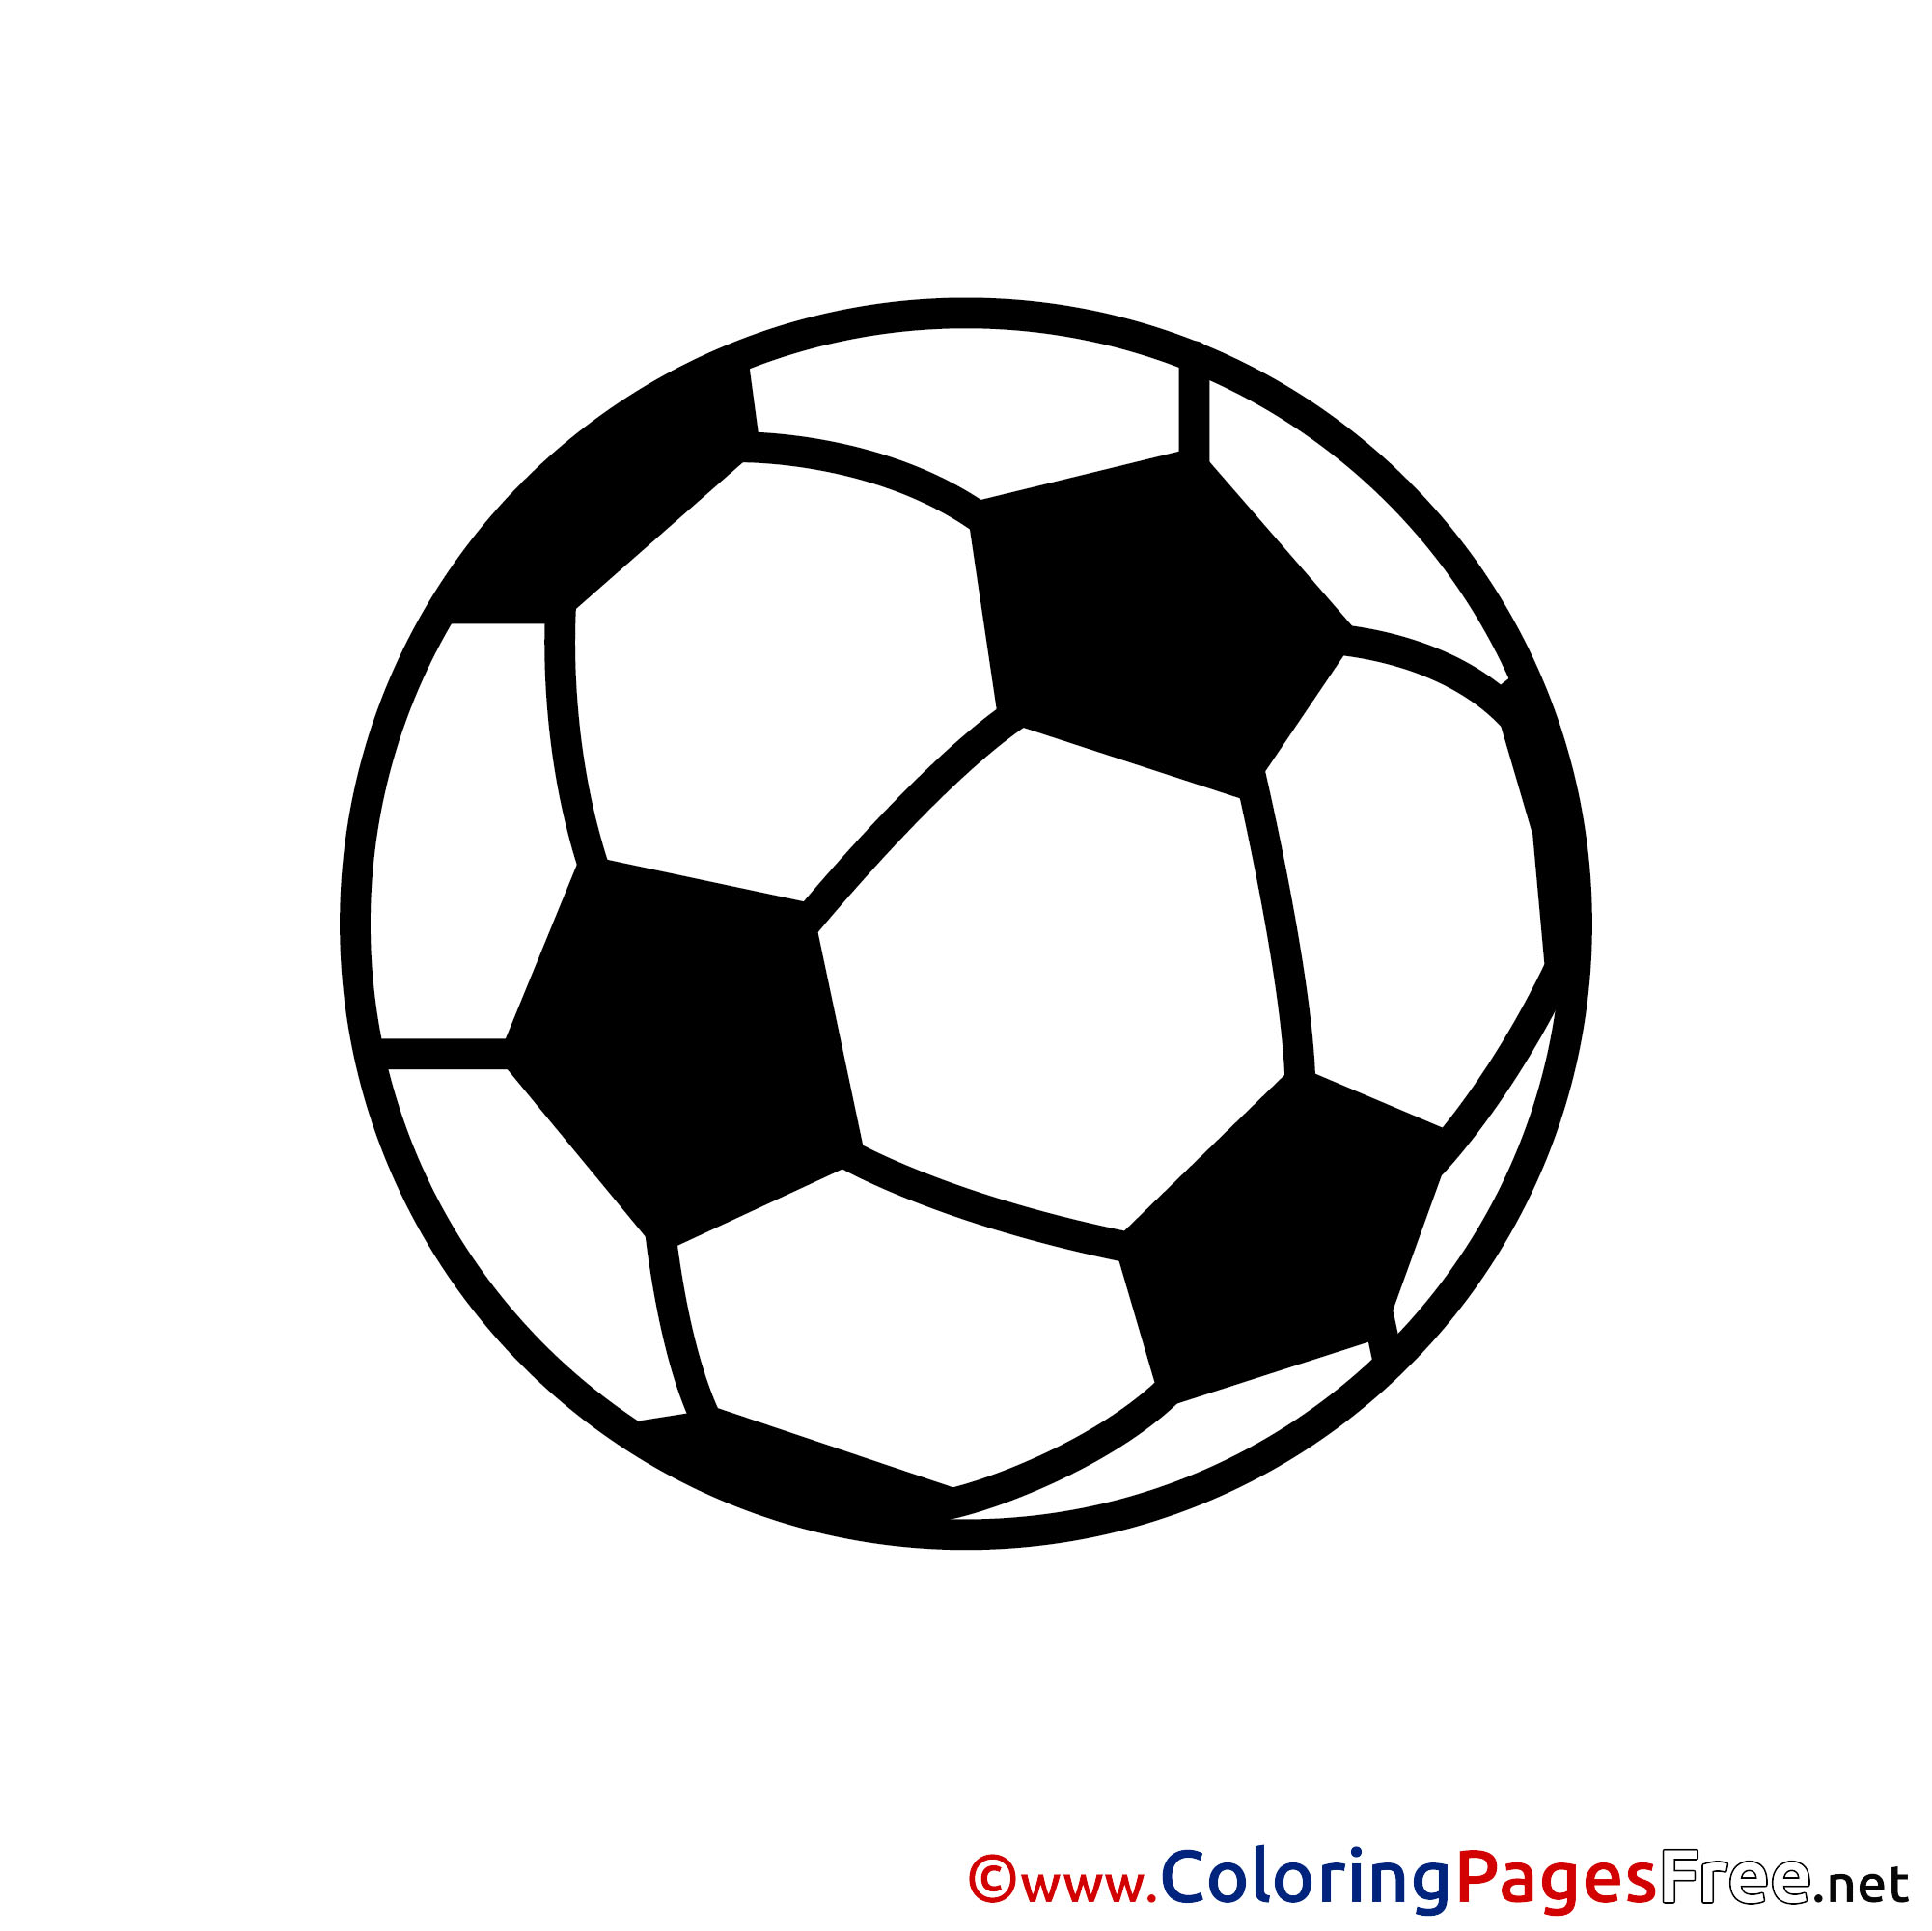 soccer-ball-colouring-page-printable-free